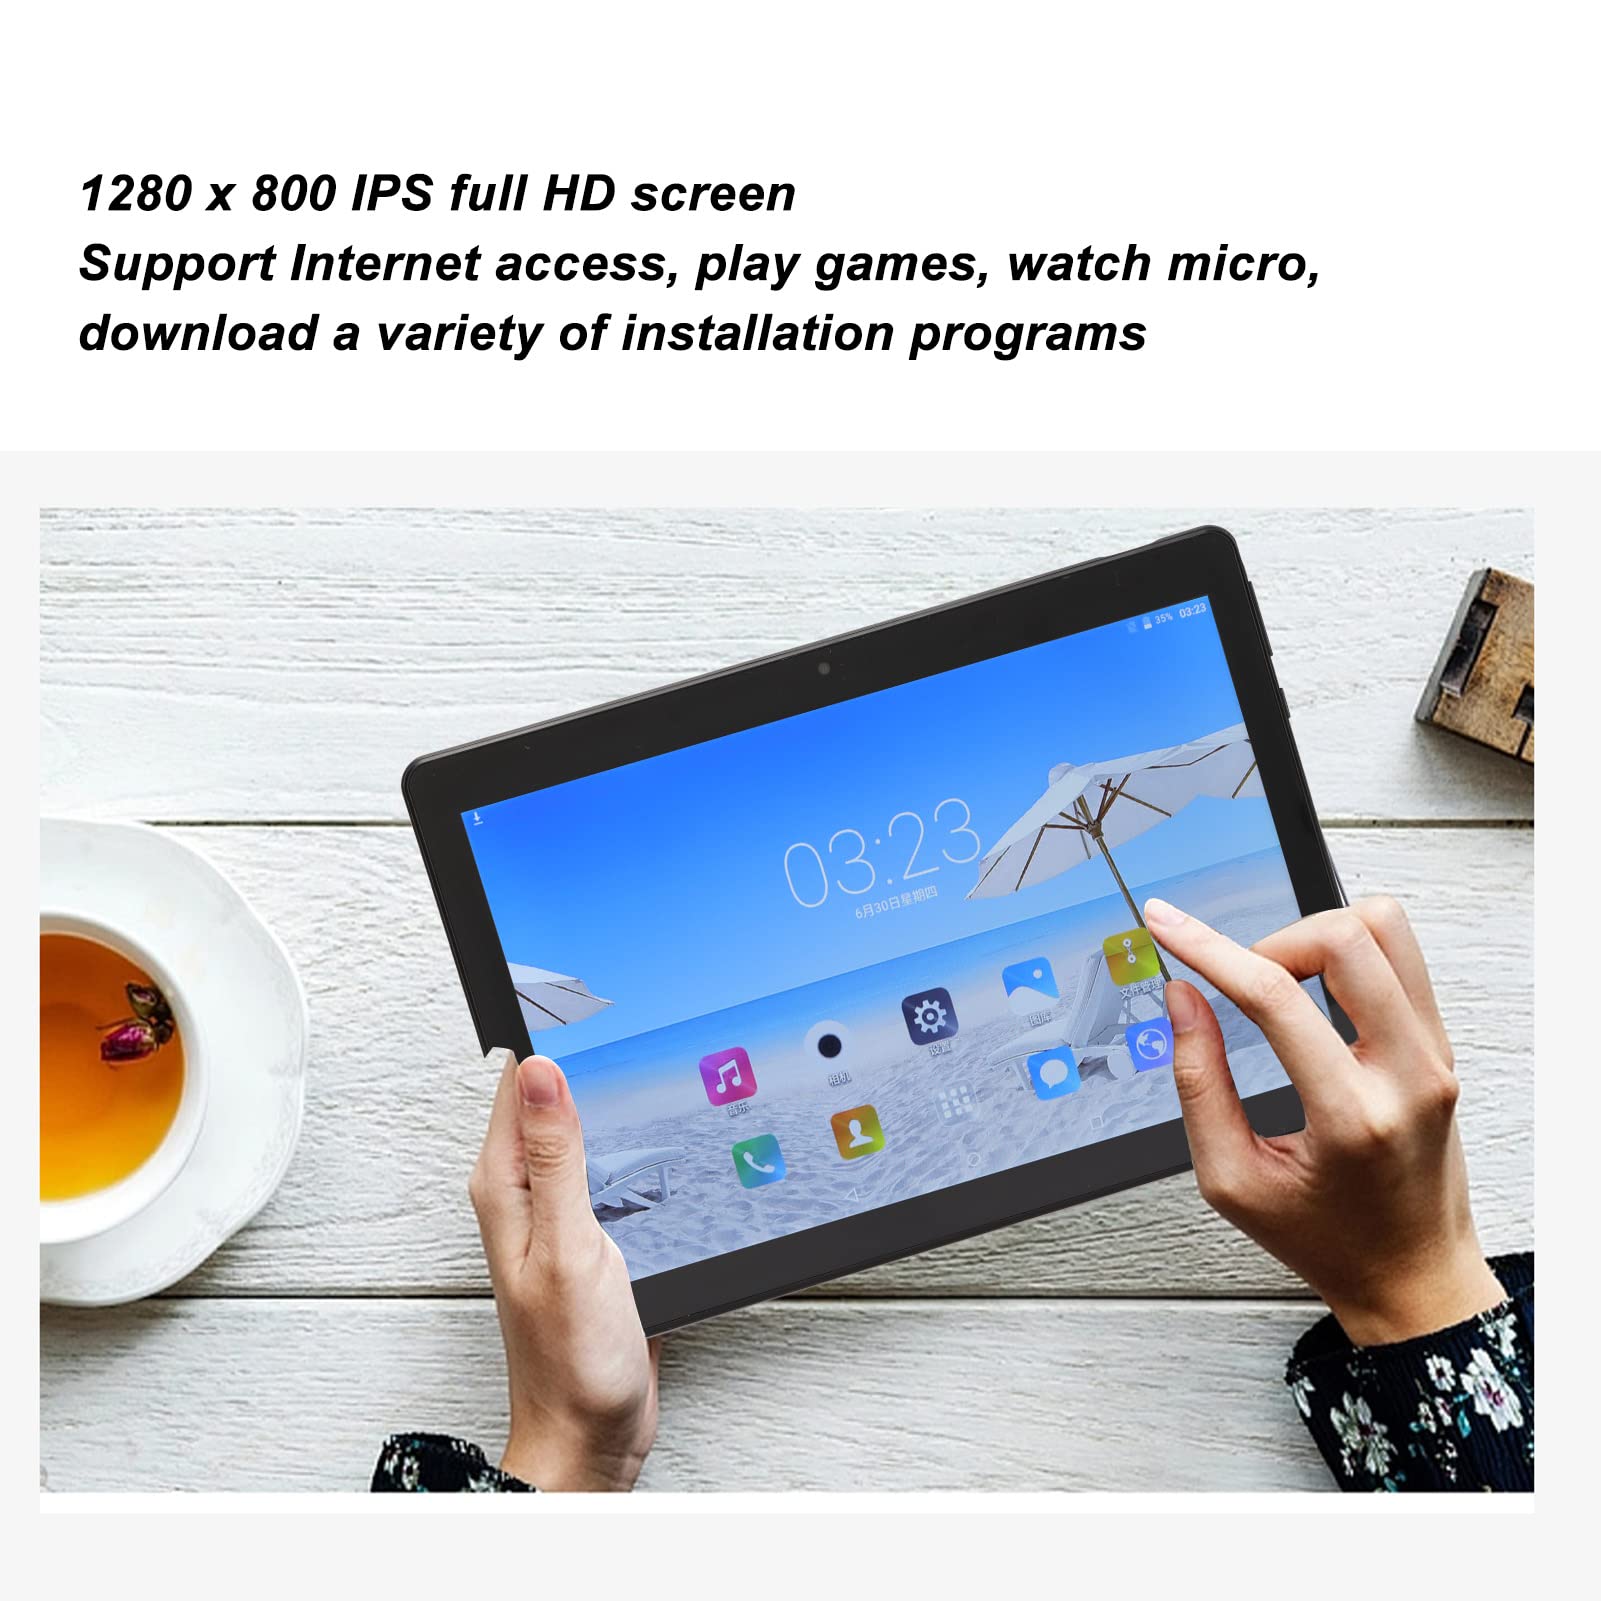 Pomya PC Tablet, 10.1 Inch HD Touch Screen WiFi Tablet, 8 Core CPU Dual SIM Triple Camera for 5.1, 1GB RAM 16GB ROM 3G Network Tablet for Daily Life